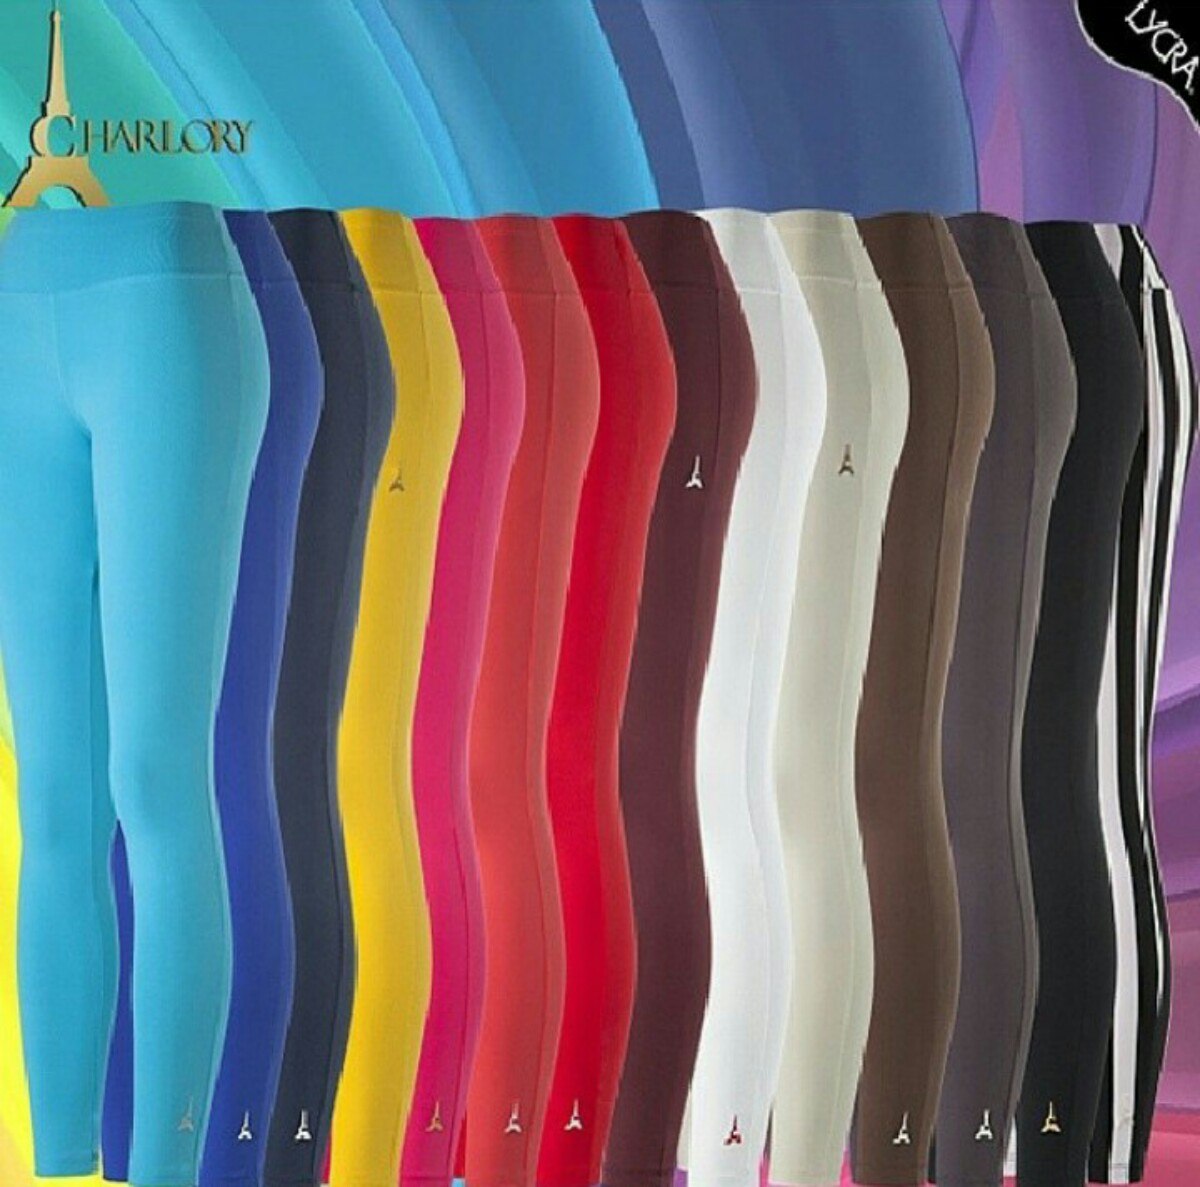 Legging Charlory Top Sellers, SAVE 53%.